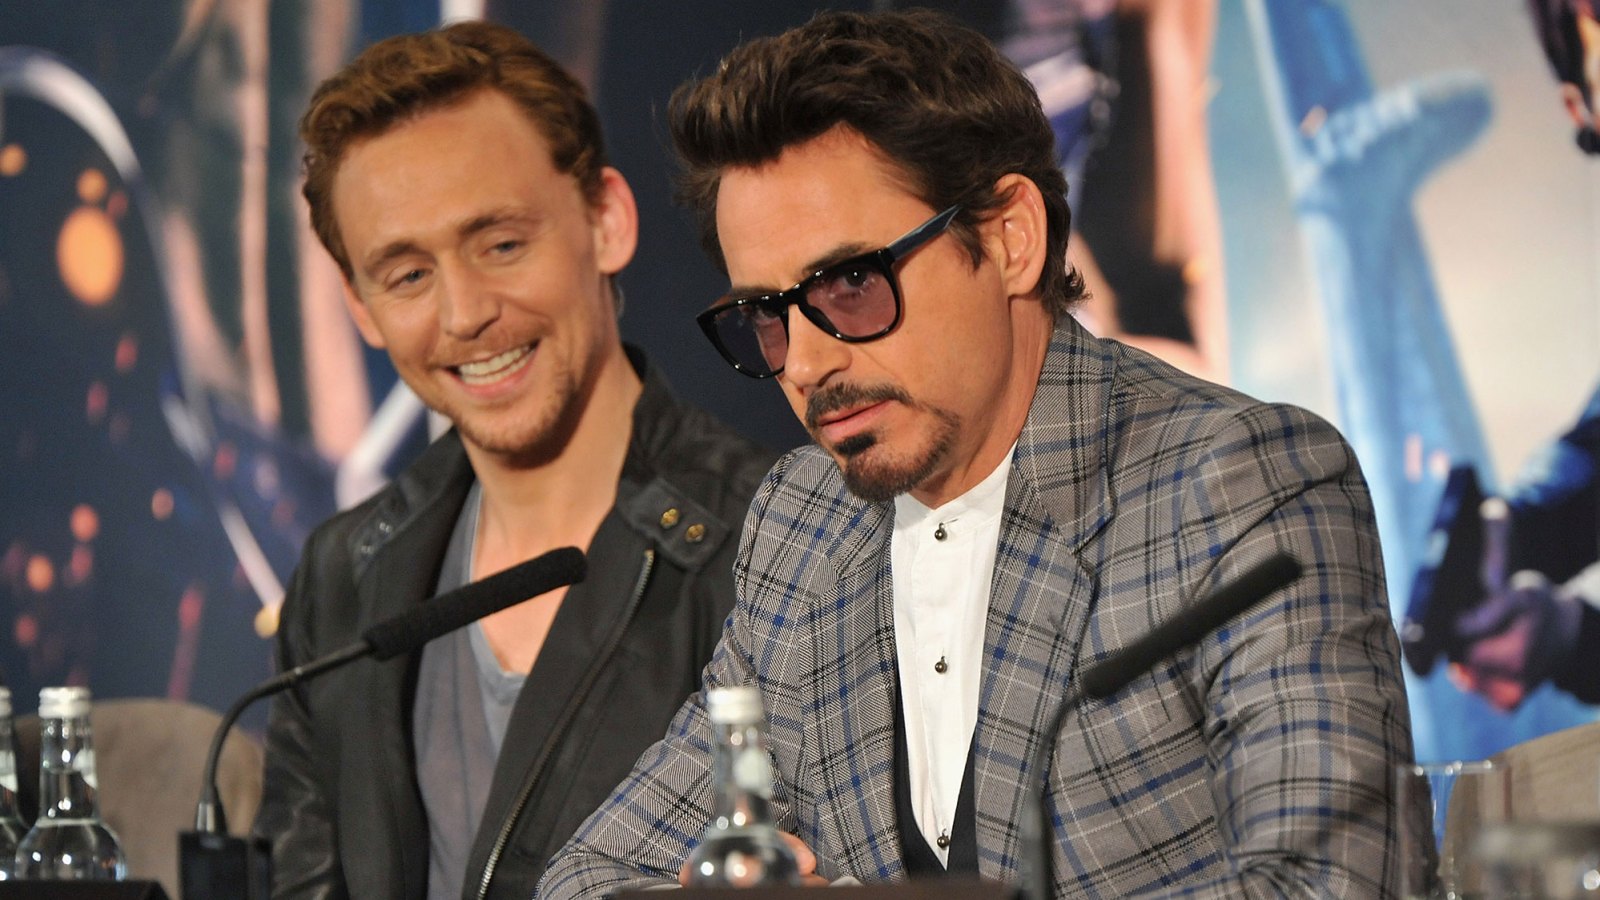 Tom Hiddleston joins Instagram and gets mocked by Robert Downey Jr.